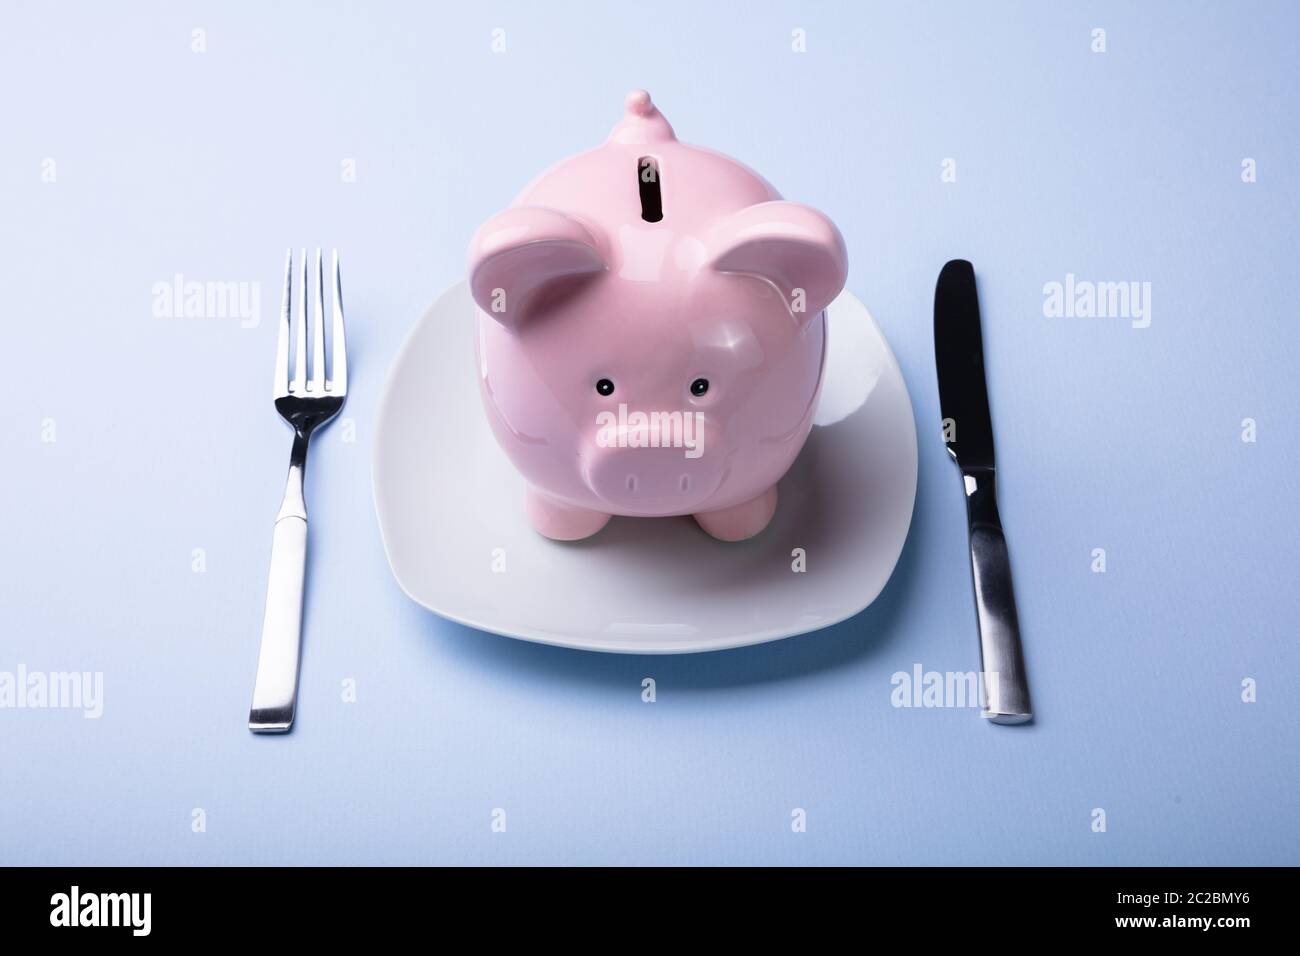 Elevated View Of Pink Piggy Bank On The White Plate With Fork And Knife Stock Photo